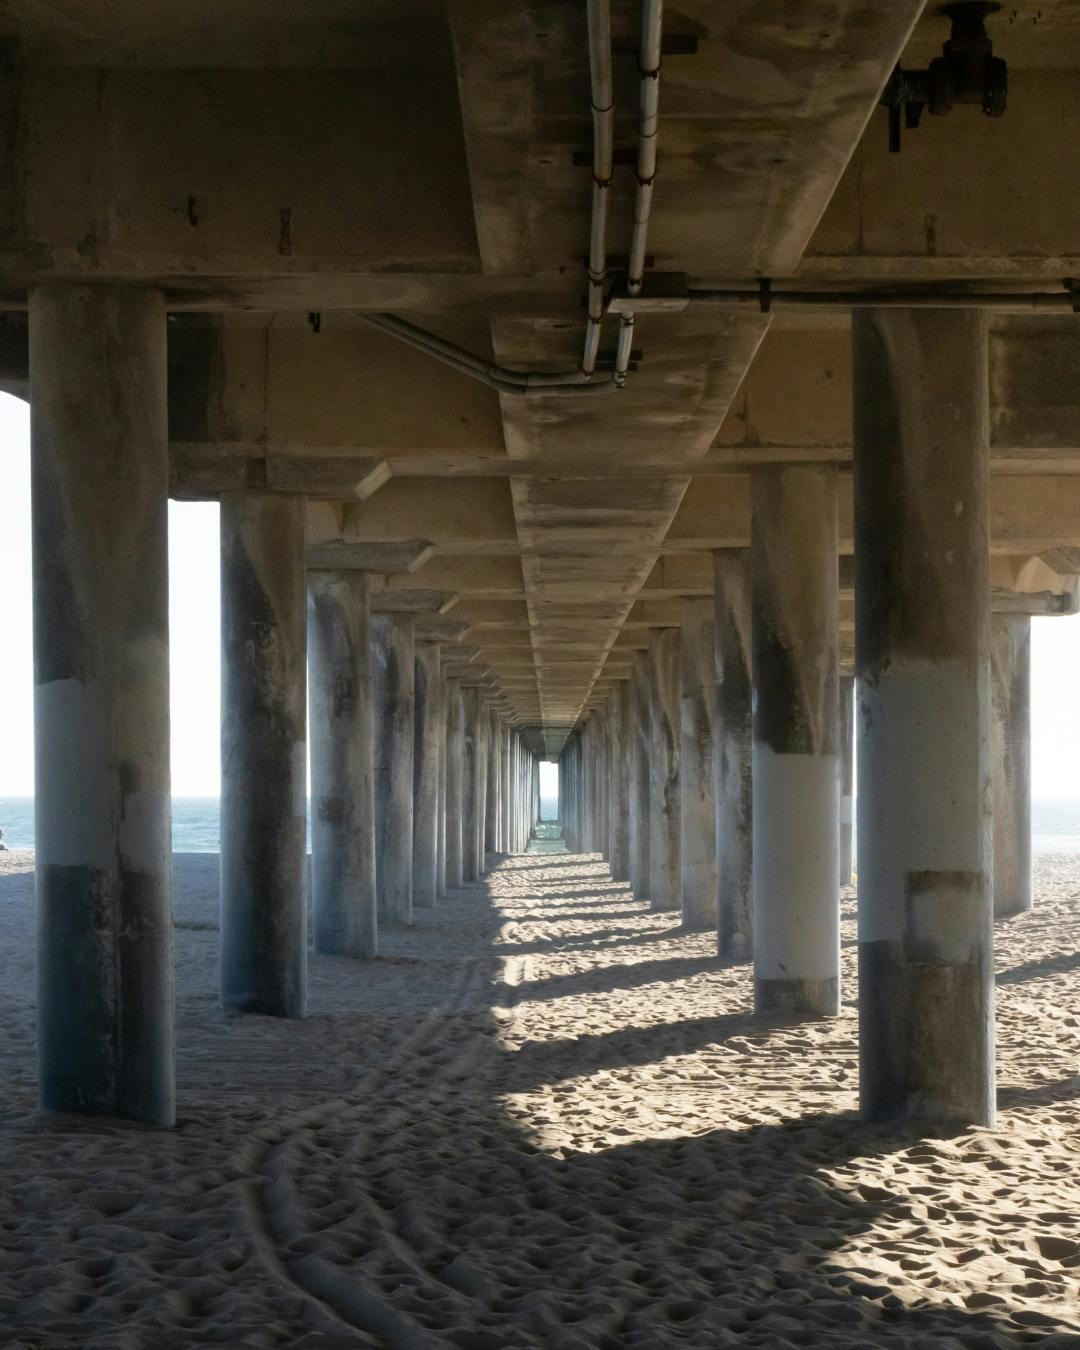 Underneath the pier leading line.